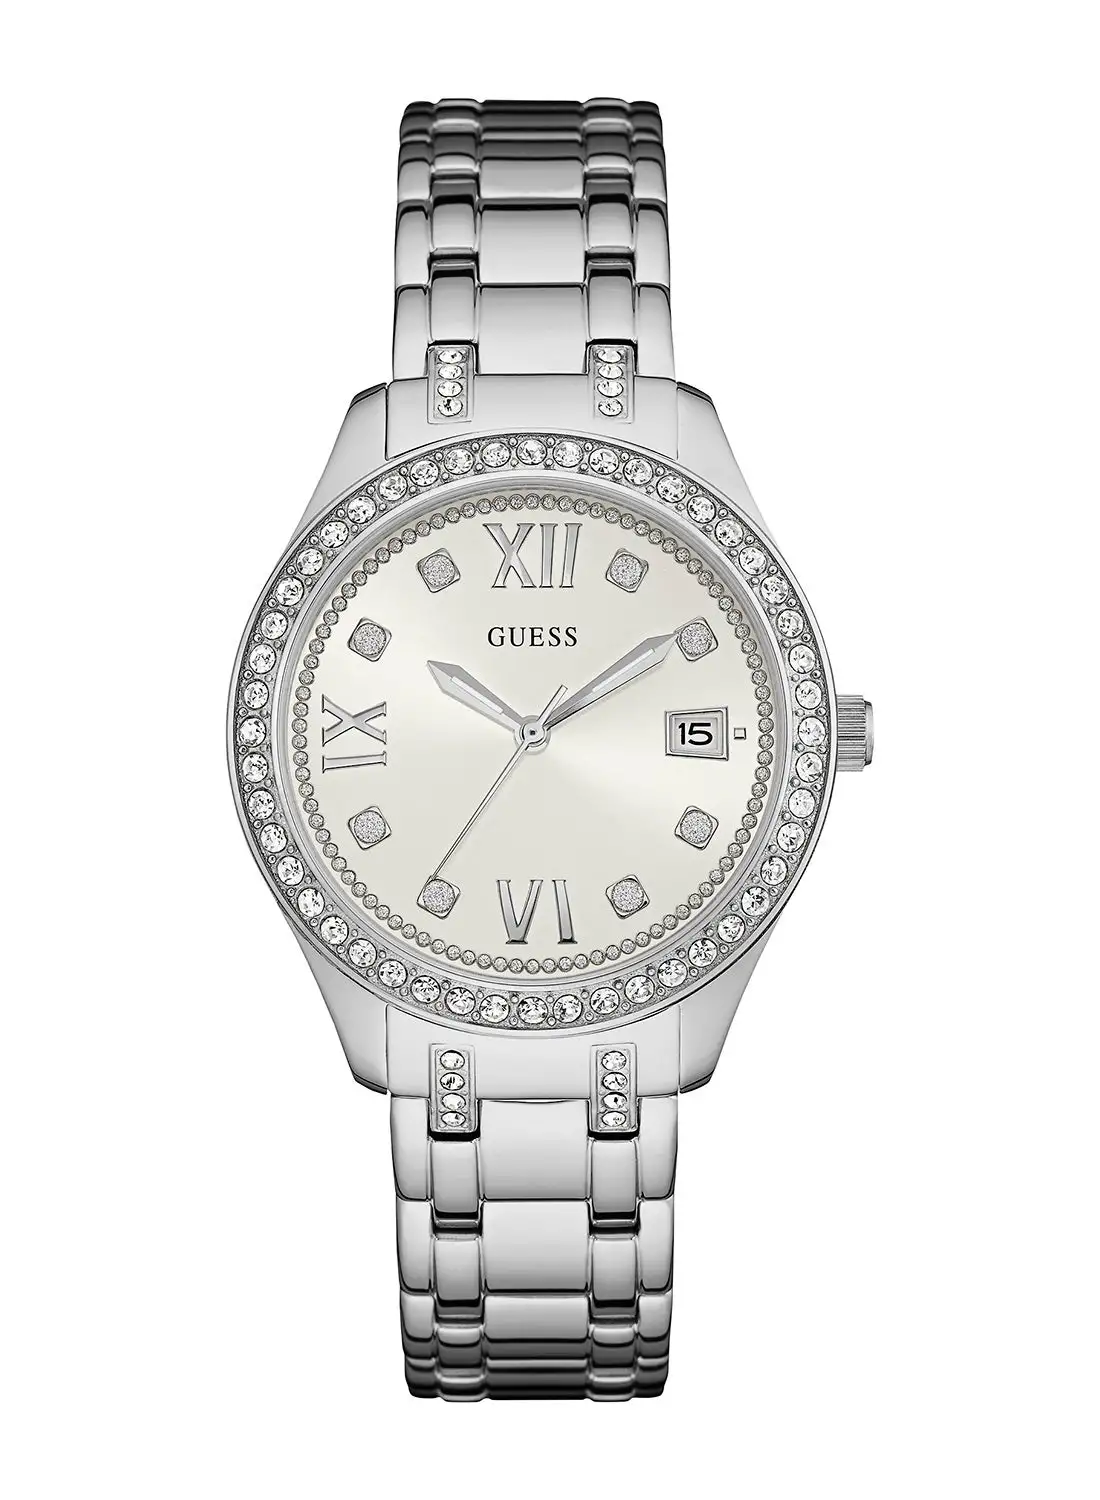 GUESS Women's Analog Round Shape Stainless Steel Wrist Watch W0848L1 - 38 Mm